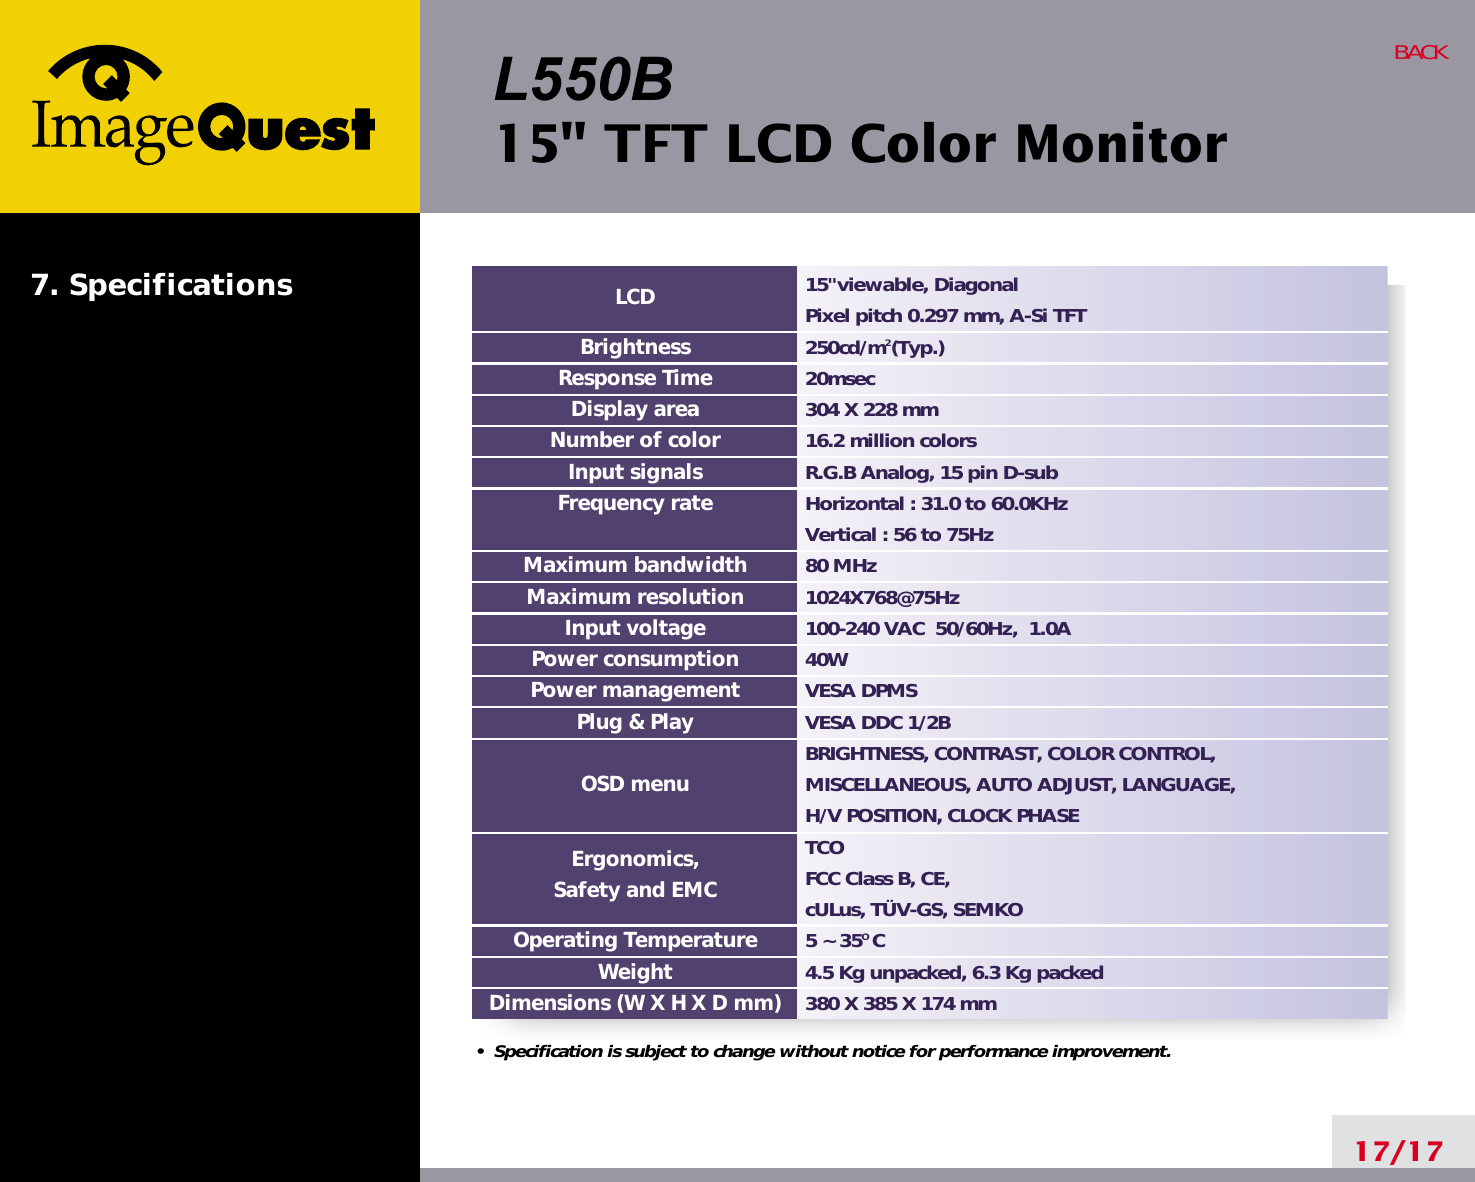 L550B15&quot; TFT LCD Color Monitor17/17BACK15&quot;viewable, DiagonalPixel pitch 0.297 mm, A-Si TFT250cd/m2(Typ.)20msec304 X 228 mm16.2 million colorsR.G.B Analog, 15 pin D-subHorizontal : 31.0 to 60.0KHzVertical : 56 to 75Hz80 MHz1024X768@75Hz100-240 VAC  50/60Hz,  1.0A40WVESA DPMSVESA DDC 1/2BBRIGHTNESS, CONTRAST, COLOR CONTROL, MISCELLANEOUS, AUTO ADJUST, LANGUAGE, H/V POSITION, CLOCK PHASETCOFCC Class B, CE,cULus, TÜV-GS, SEMKO5 ~ 35O C4.5 Kg unpacked, 6.3 Kg packed380 X 385 X 174 mmLCDBrightnessResponse TimeDisplay areaNumber of colorInput signalsFrequency rateMaximum bandwidthMaximum resolutionInput voltagePower consumptionPower managementPlug &amp; PlayOSD menuErgonomics,Safety and EMCOperating TemperatureWeightDimensions (W X H X D mm)•  Specification is subject to change without notice for performance improvement.7. Specifications